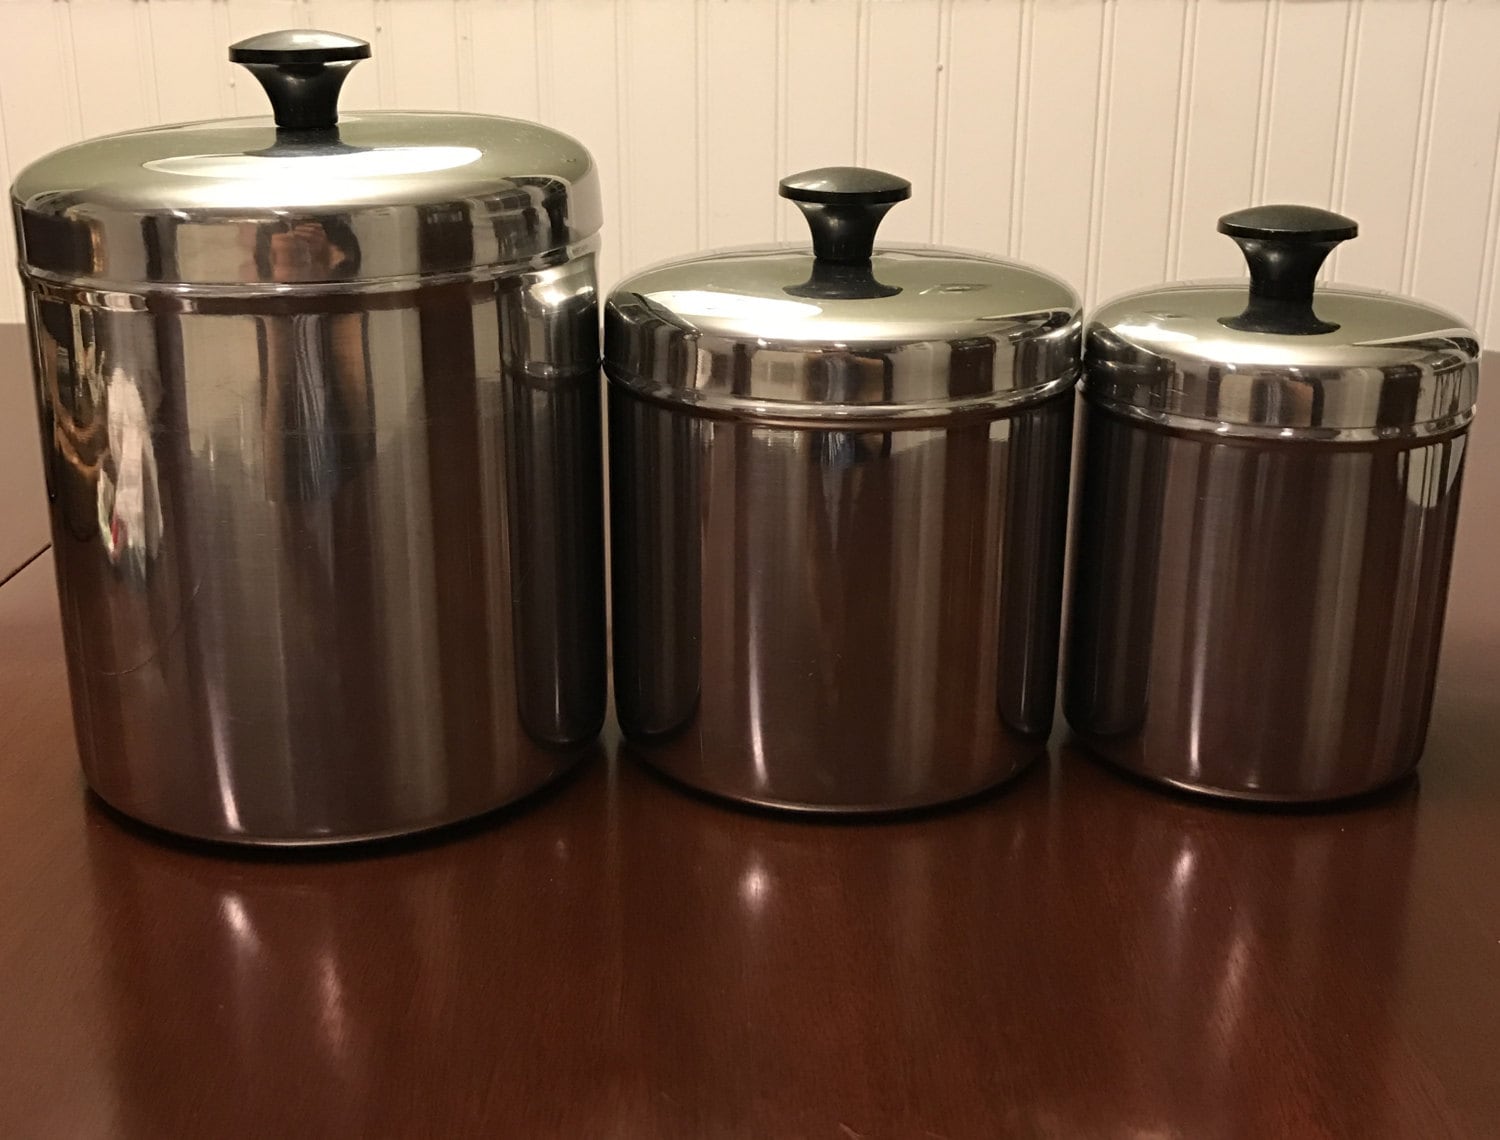 Vintage Chrome Canister Set, Three piece canister set